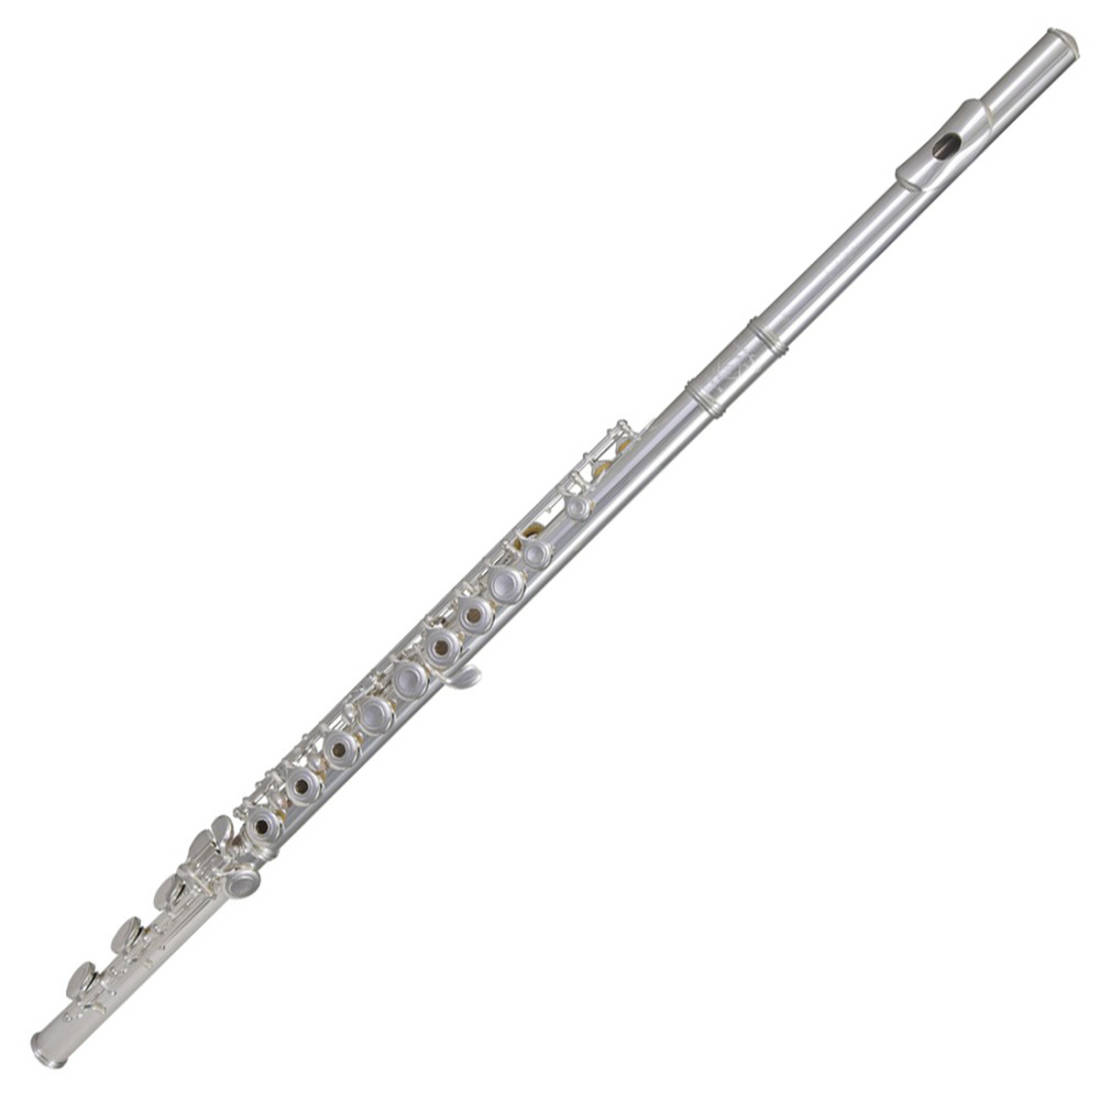 3SB Solid Silver Flute Outfit - Inline - B Foot Joint